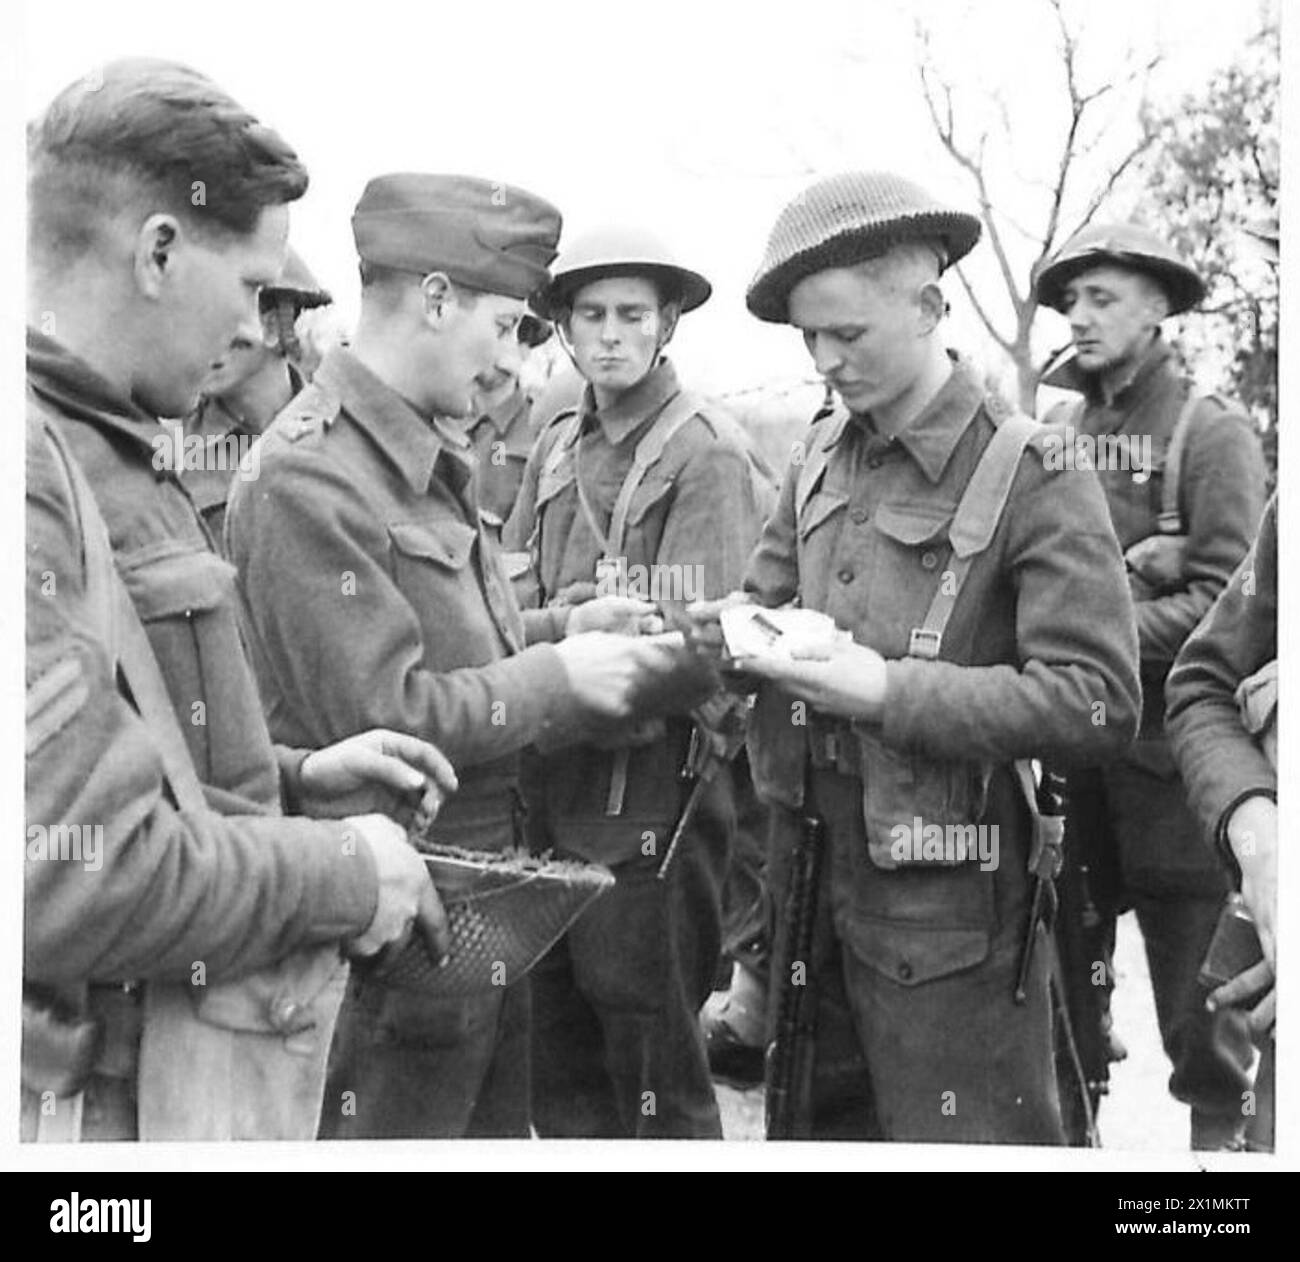 ITALY : FIFTH ARMY : BATTLE PATROL - Fus. W.H. Williams of Swansea Valley, Abercrave, hands over his pay book before going on patrol, British Army Stock Photo